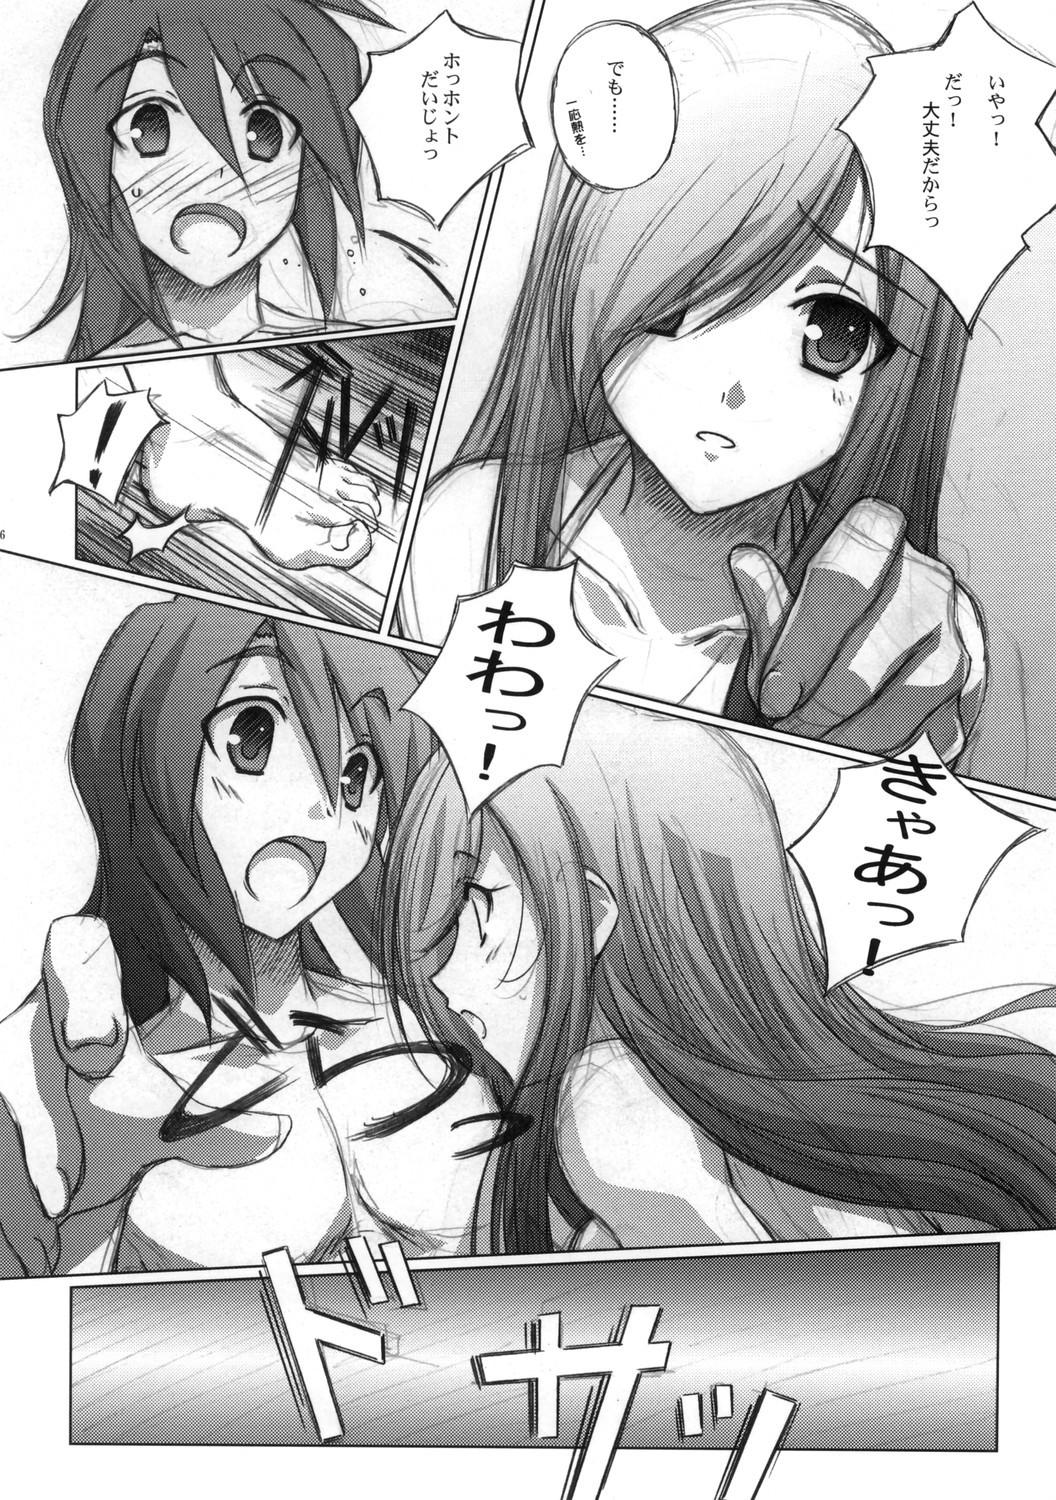 Boobies Melon ni Melon Melon - Tales of the abyss Free 18 Year Old Porn - Page 7